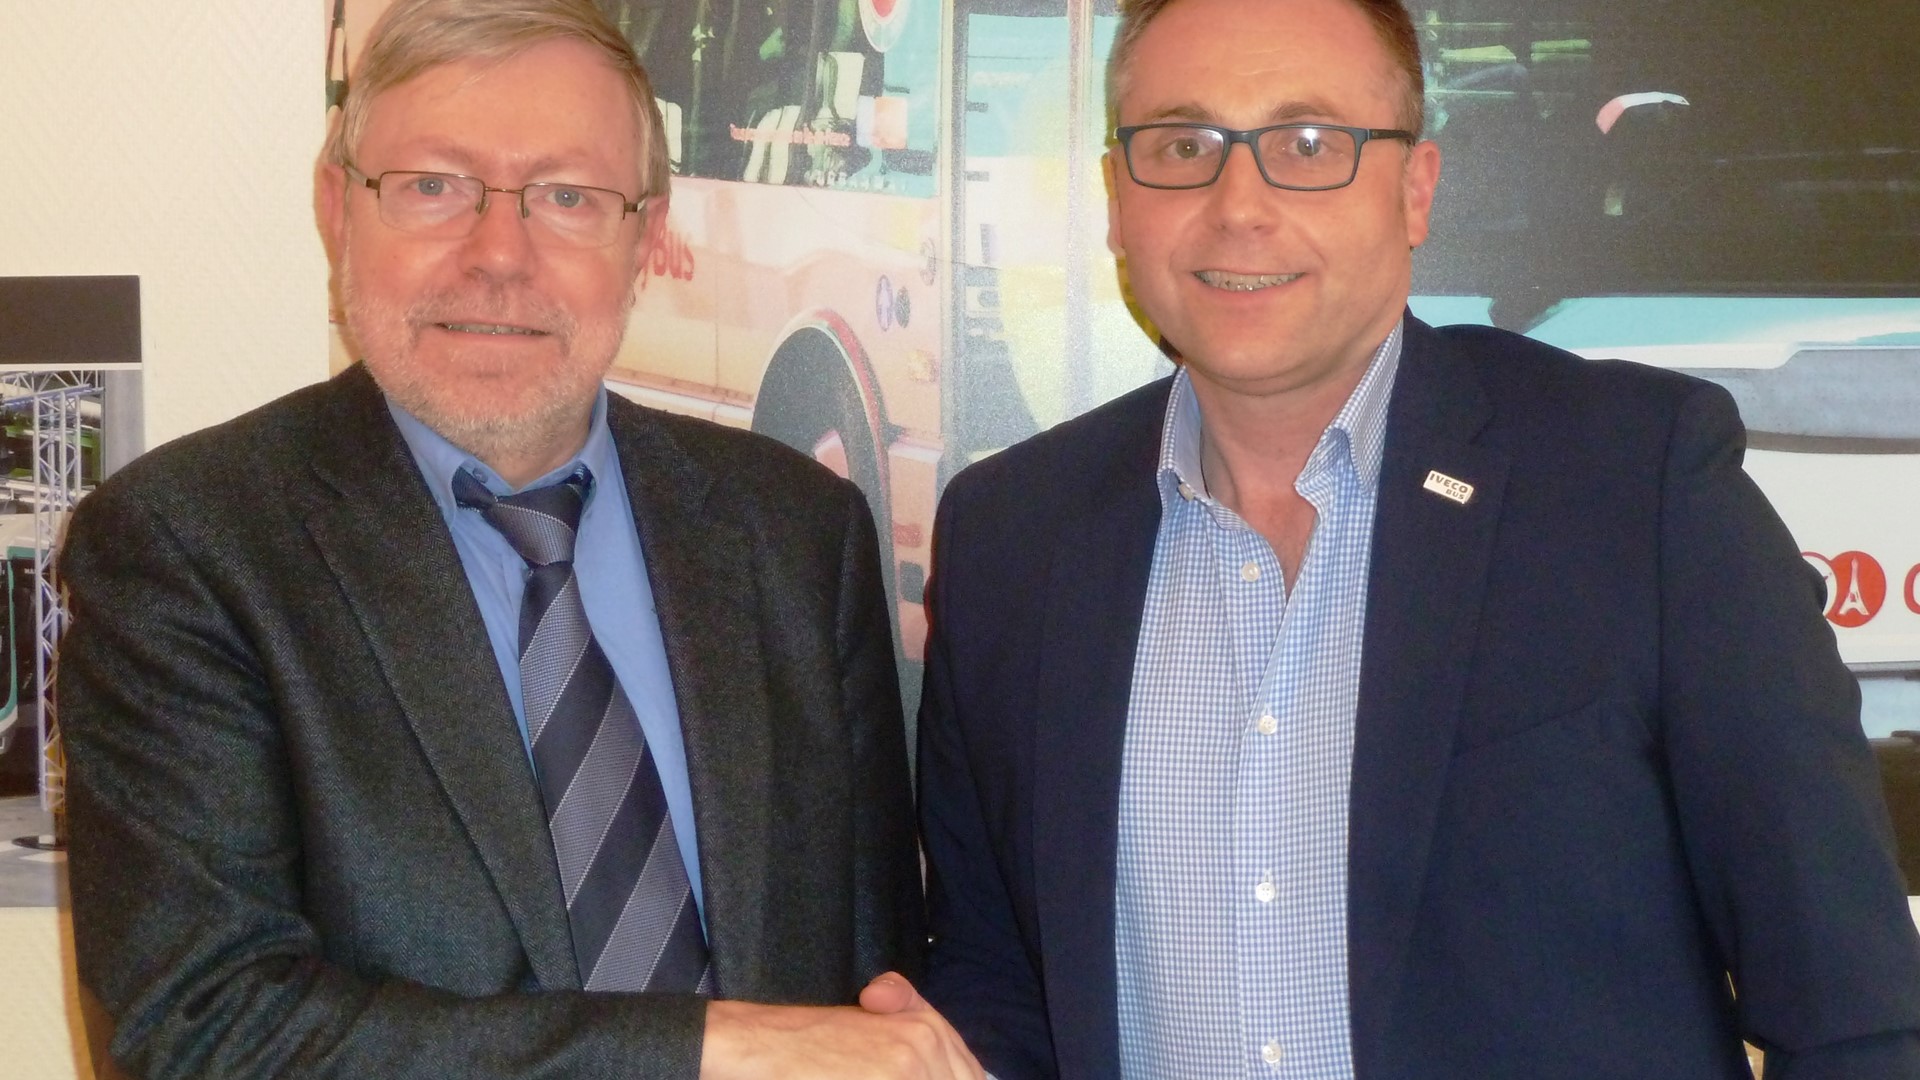 Alain Batier, Director of the MRB department at RATP (left) with Sylvain Blaise, Vice-President IVECO BUS